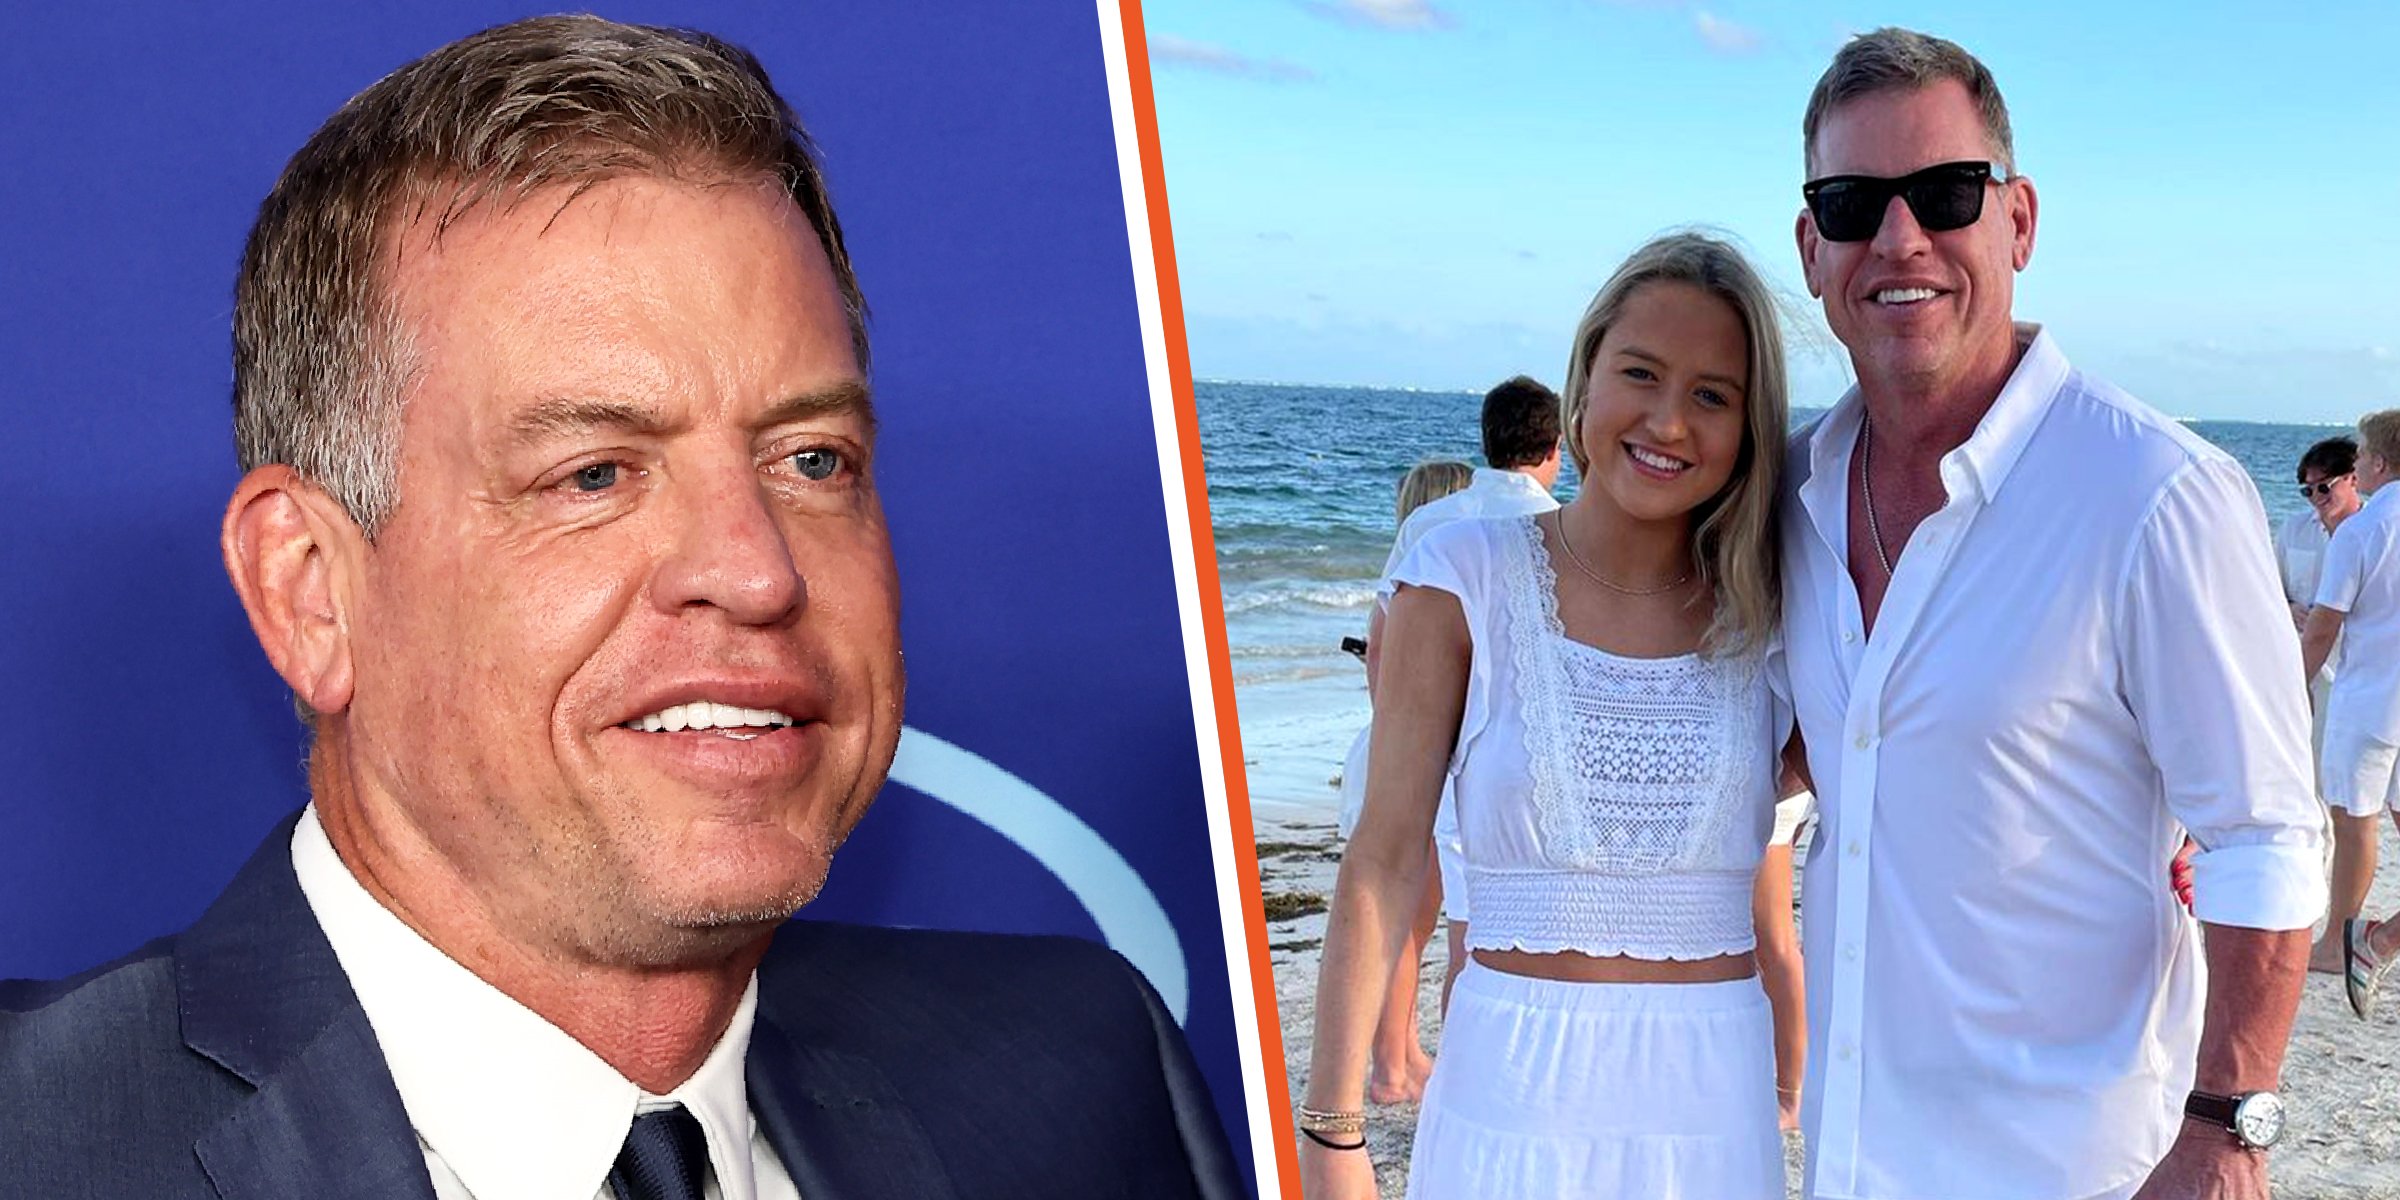 Troy Aikman | Troy and Alexa Marie Aikman | Source: instagram.com/troyaikman | Getty Images